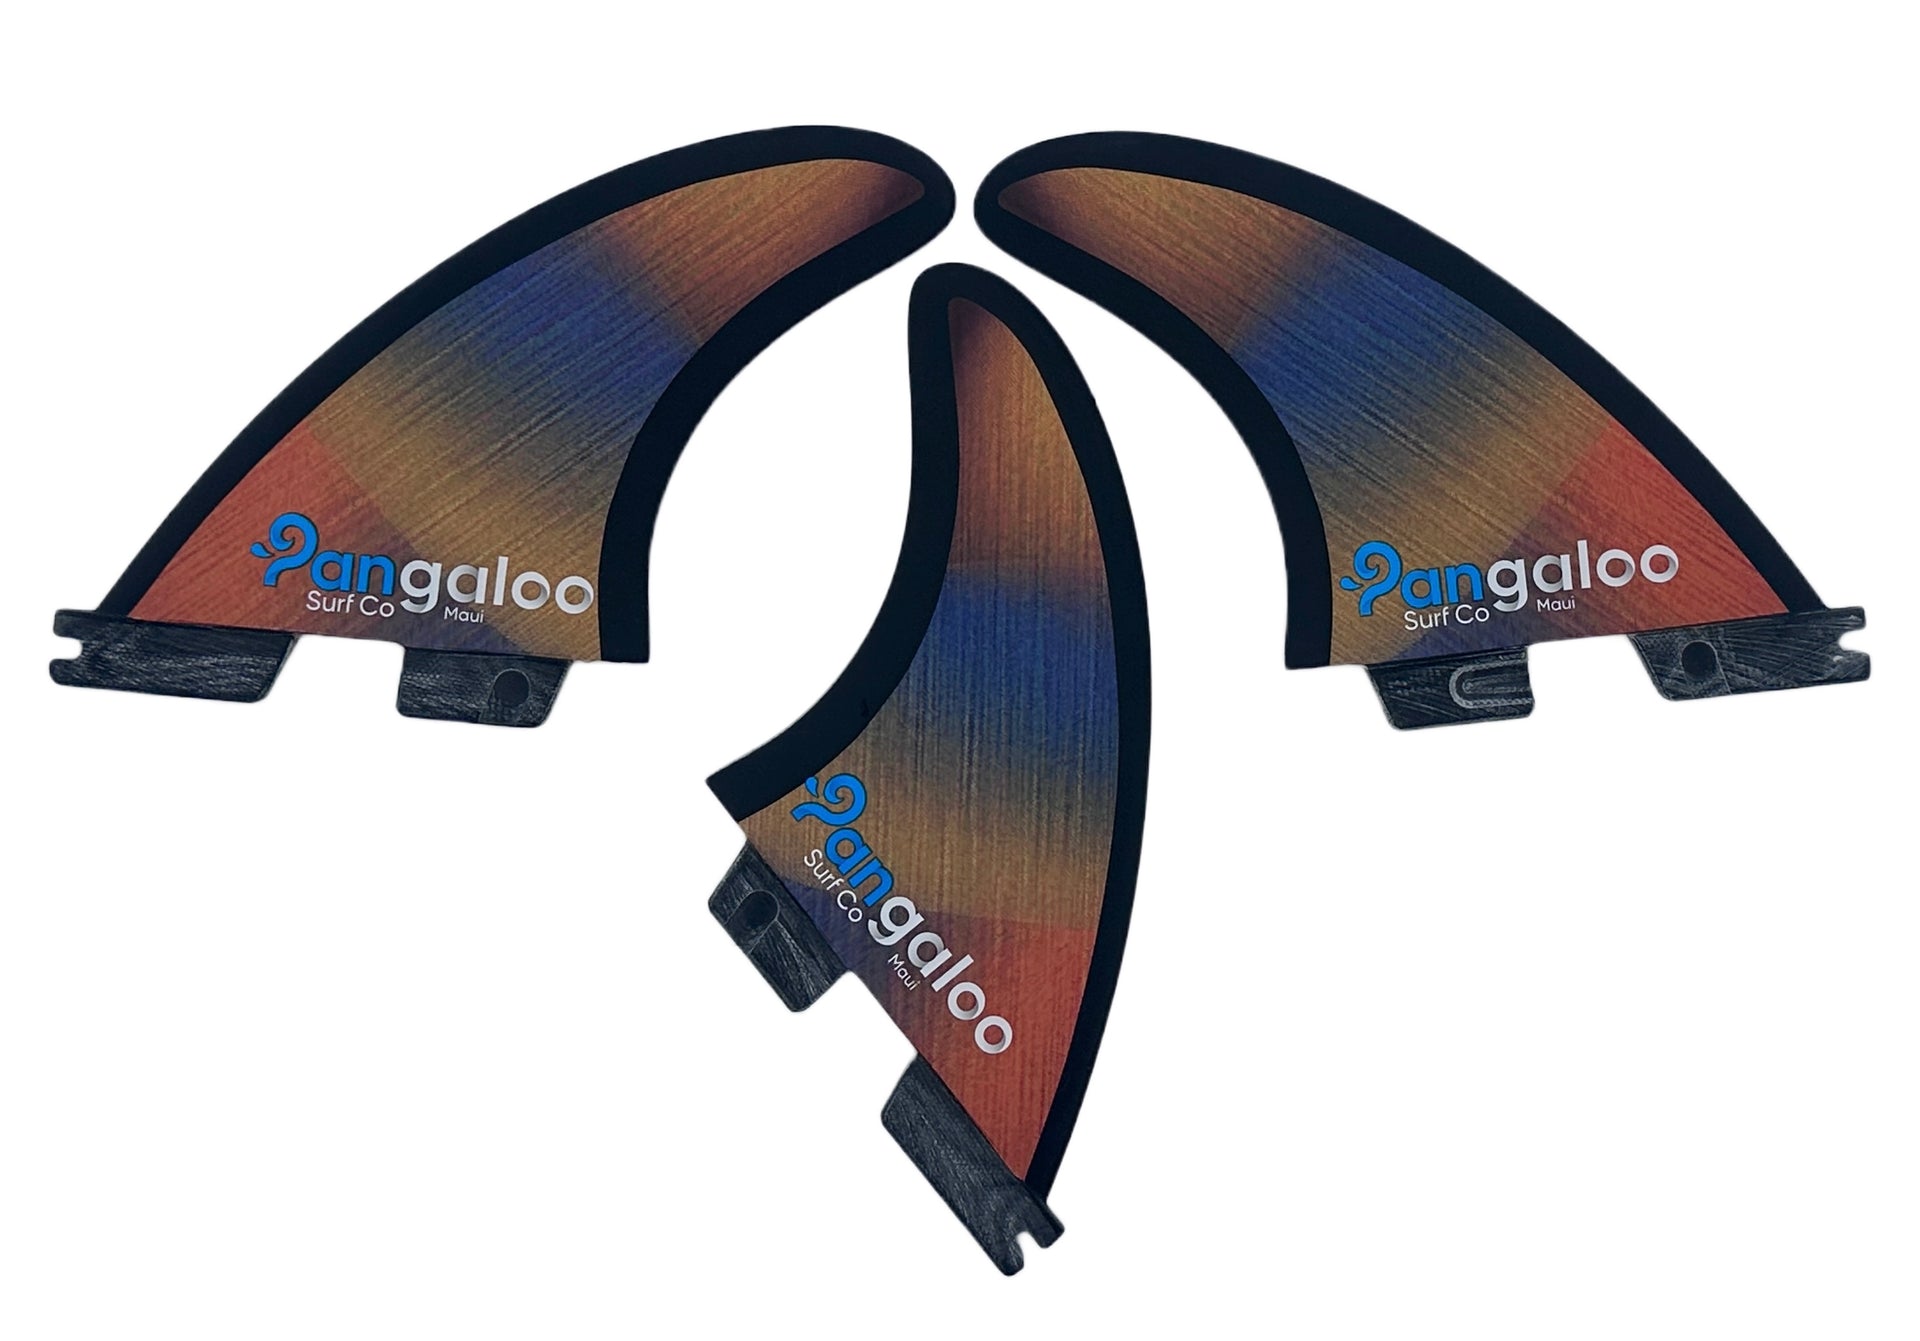 Thruster Surf Fins - Box Pangaloo Co FCSII Size Fin - – (Prismatic) Small Surf